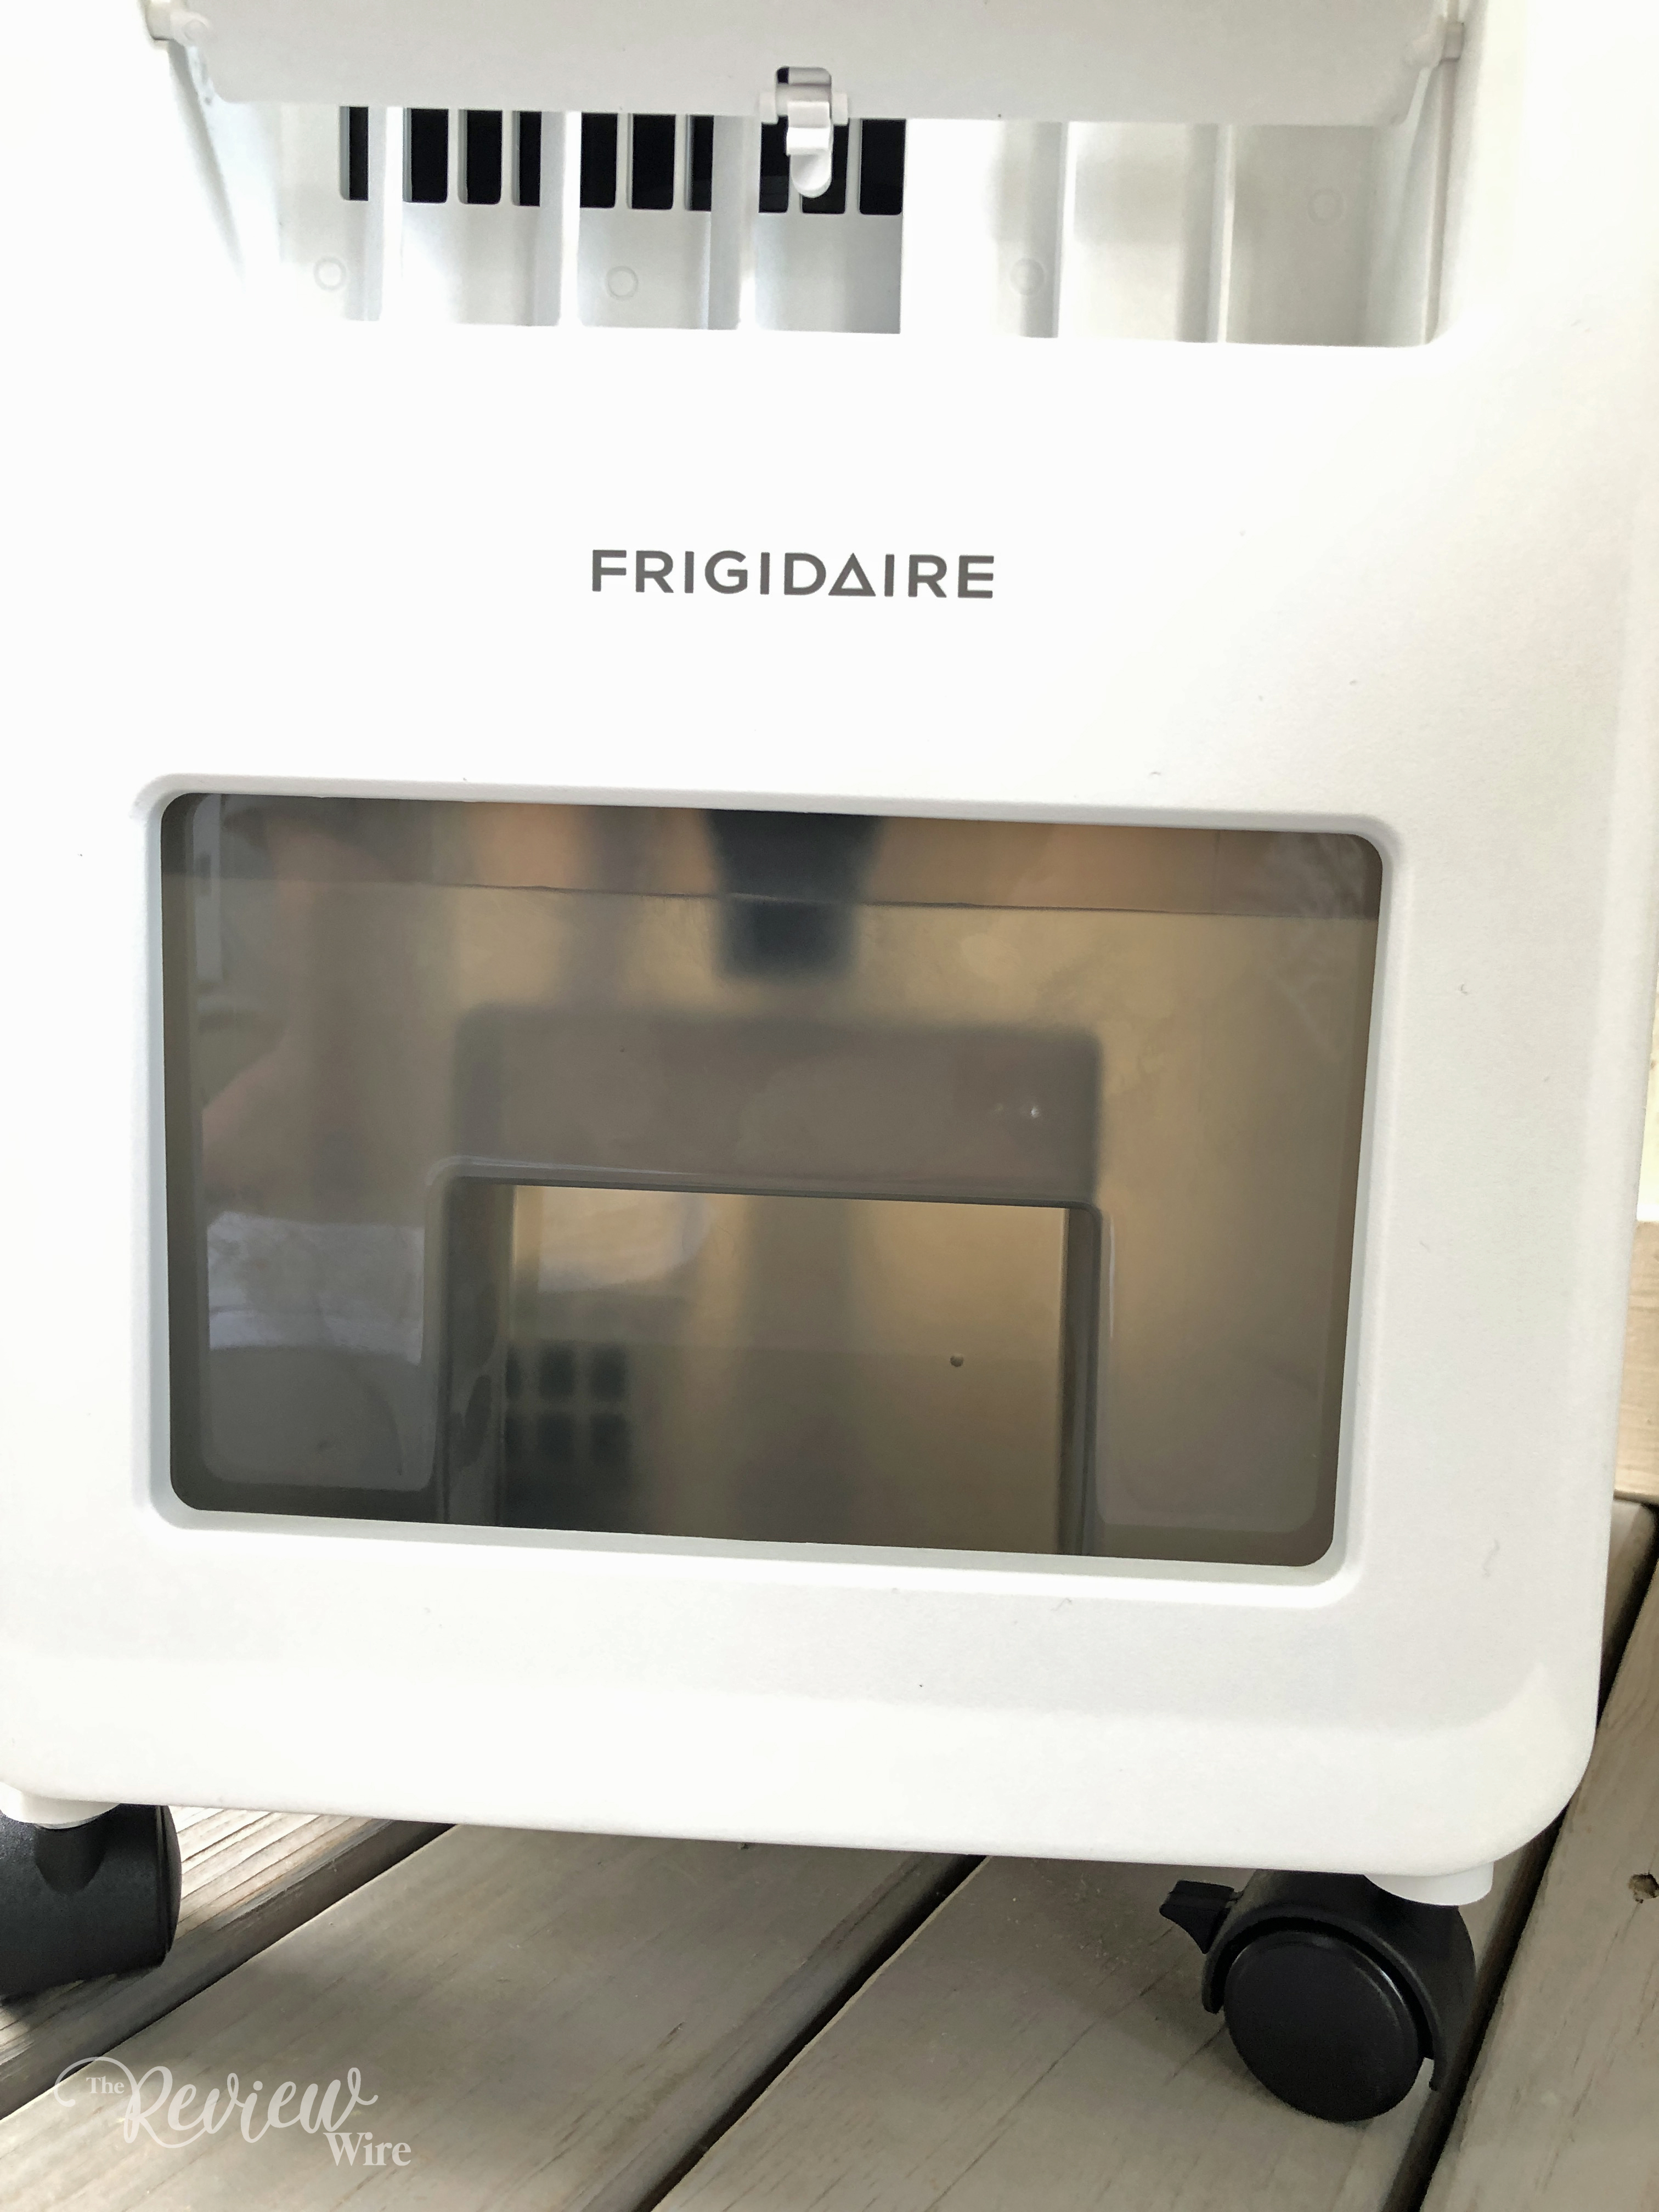 The Review Wire - Water Tank in the Frigidaire 2-in-1 Personal Evaporative Air Cooler and Fan